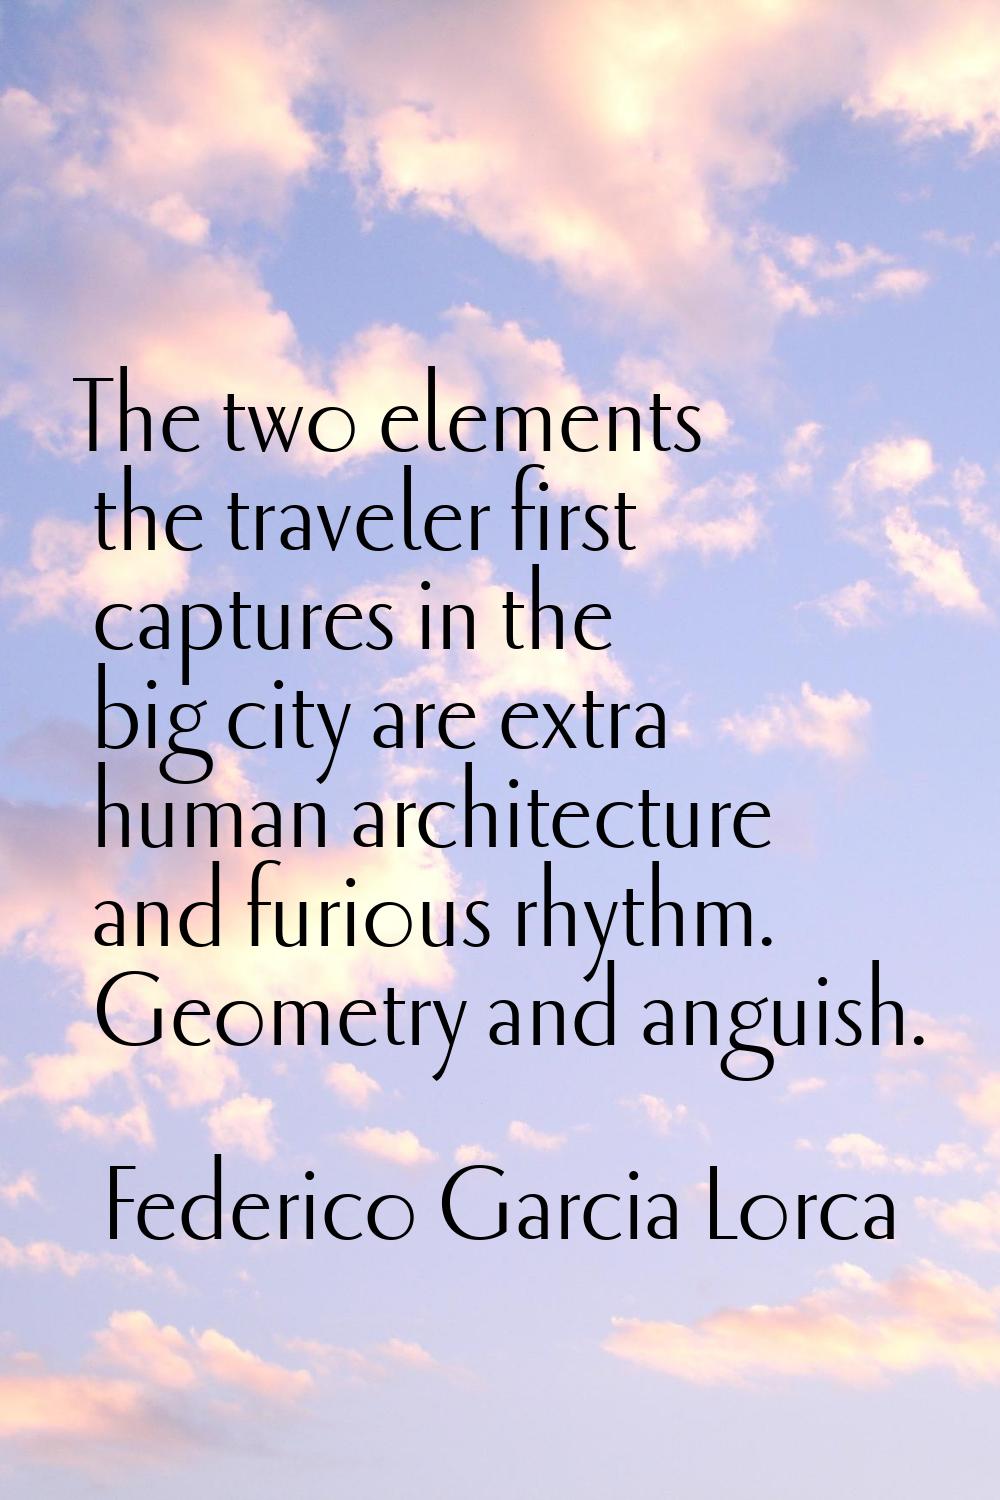 The two elements the traveler first captures in the big city are extra human architecture and furio